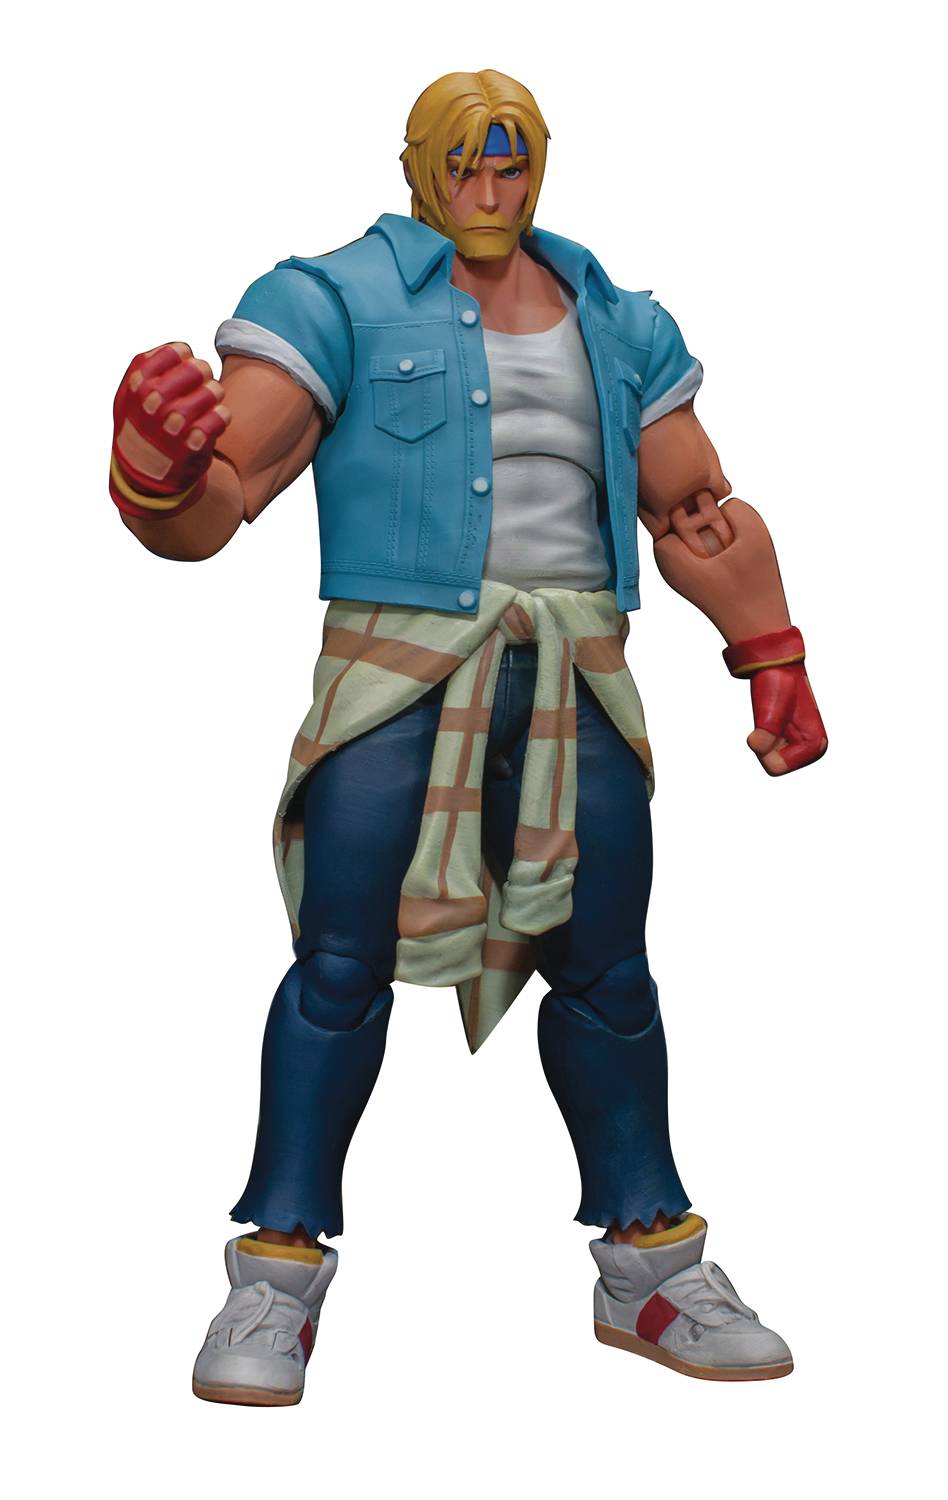 STORM COLLECTIBLES STREETS OF RAGE 4 AXEL STONE 1/12 ACTION FIGURE